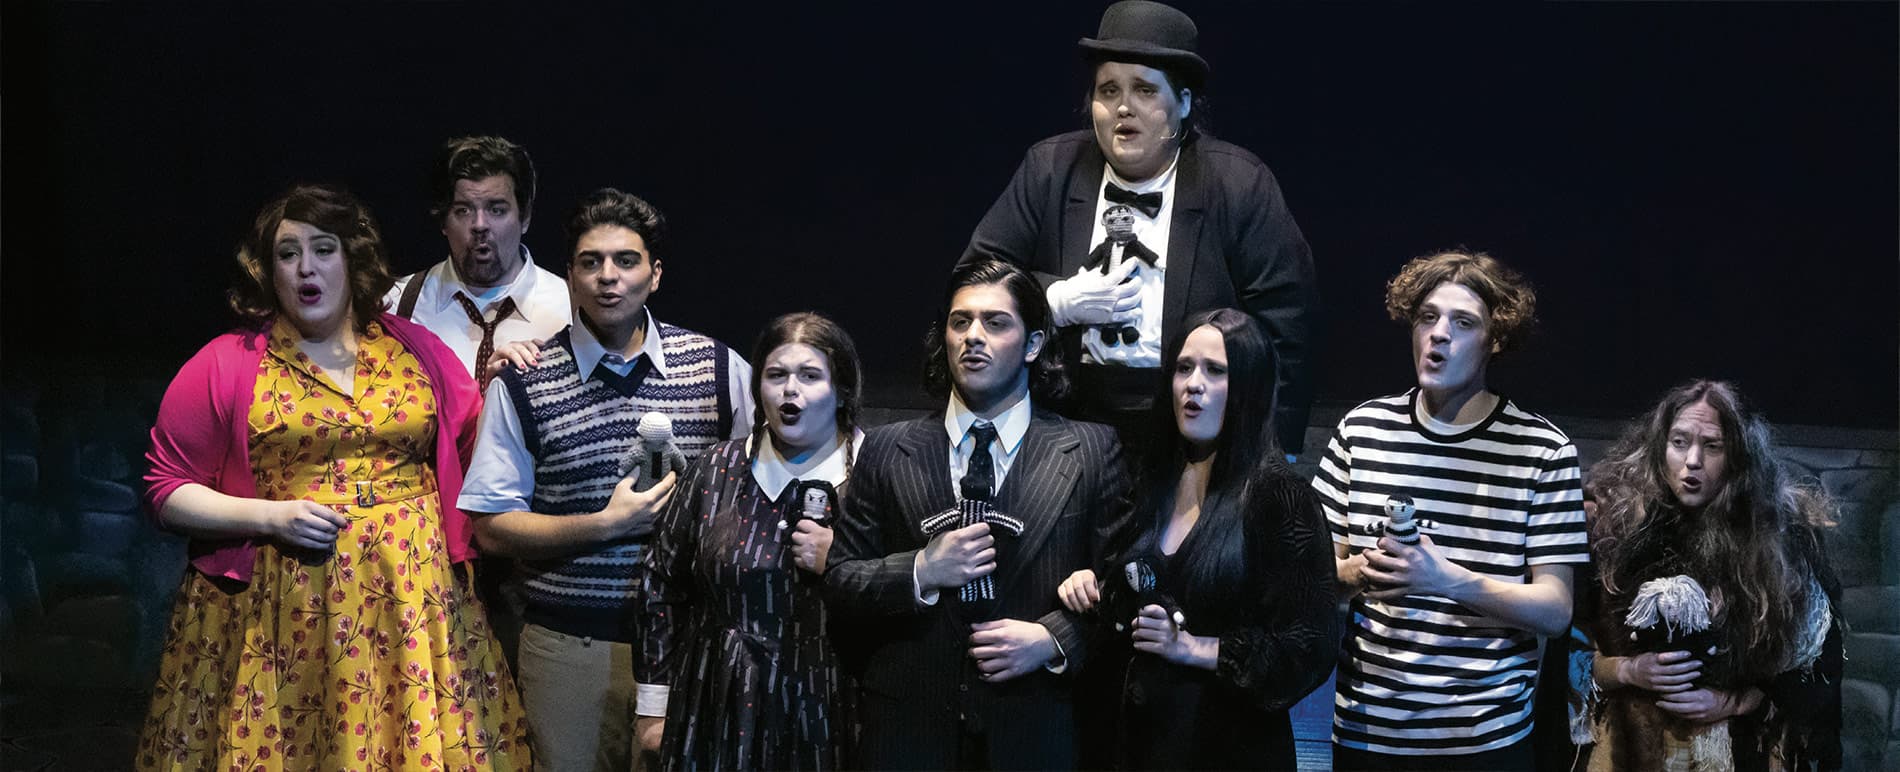 A DMTC production of the Addams Family Musical